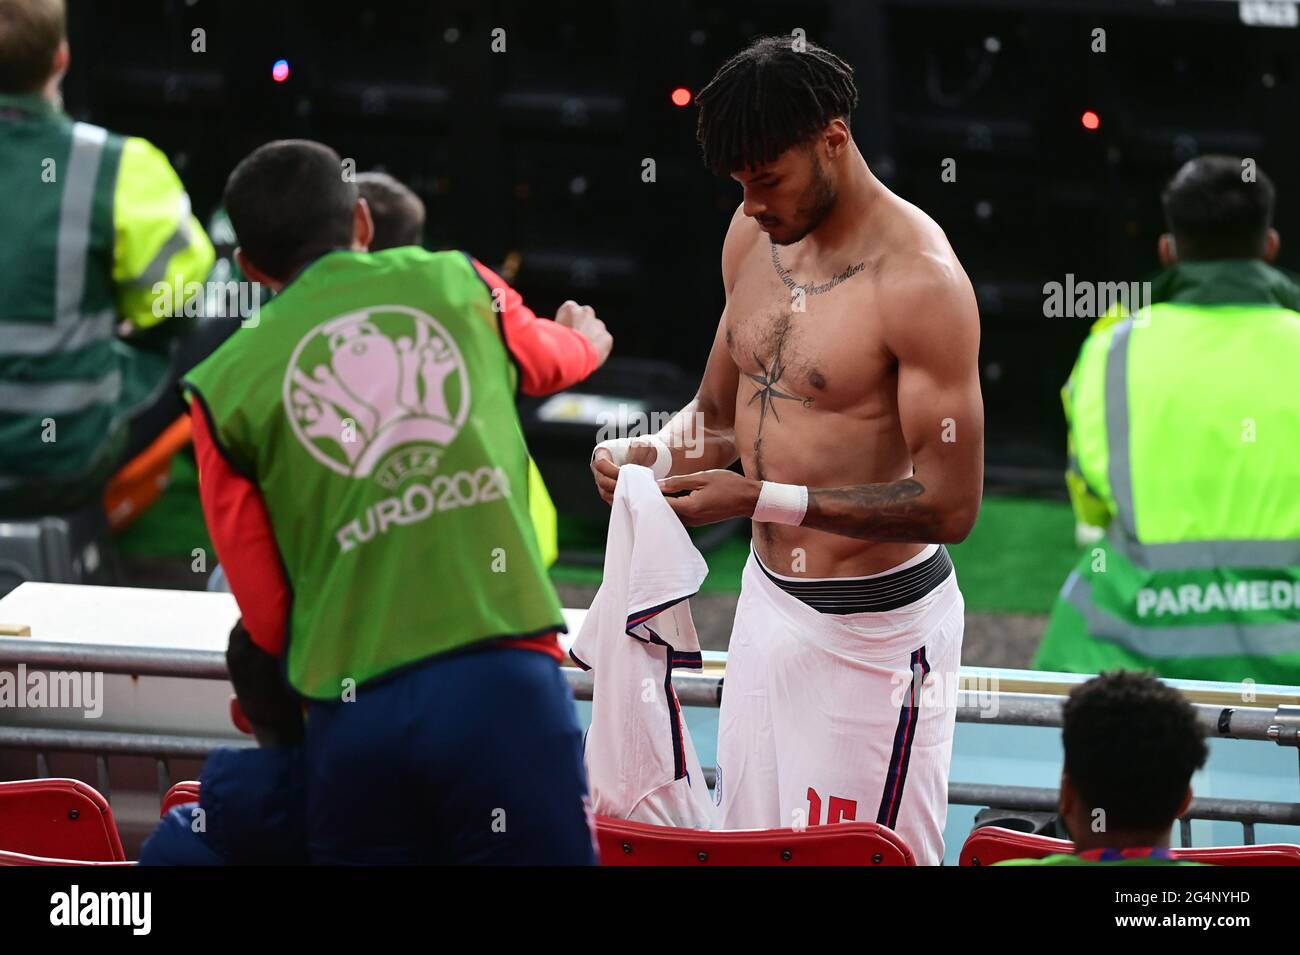 Soccer Football - Euro 2020 - Group D - Czech Republic v England - Wembley Stadium, London, Britain - June 22, 2021 England's Tyrone Mings gets ready to come on as a substitute Pool via REUTERS/Neil Hall Stock Photo